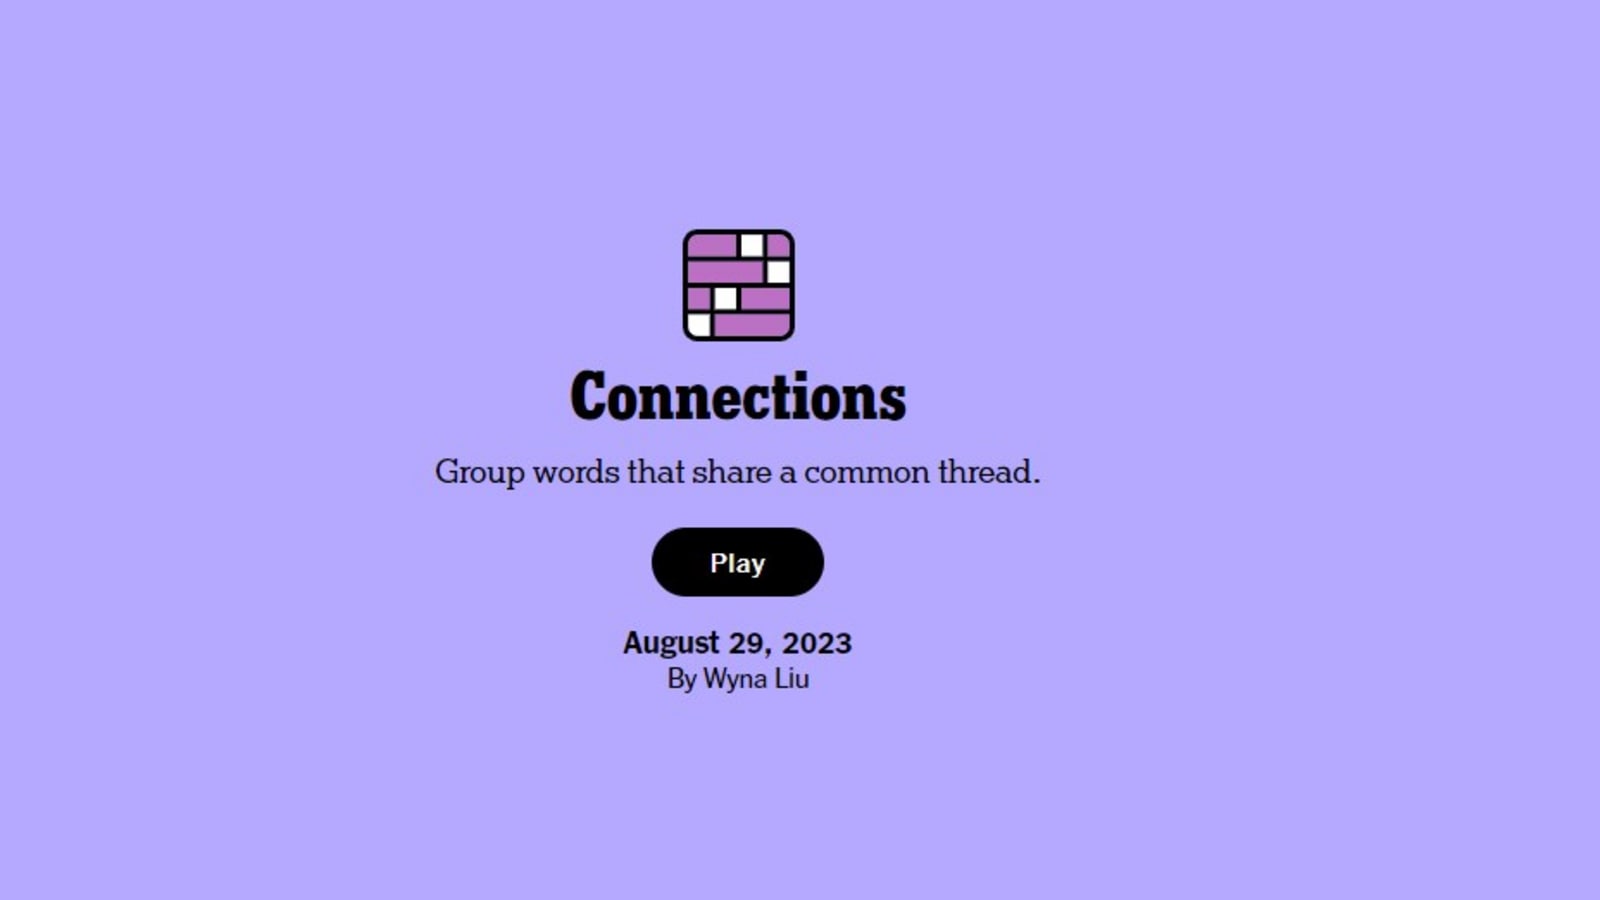 Wordle, you can now play Connections on iPhone and Android via